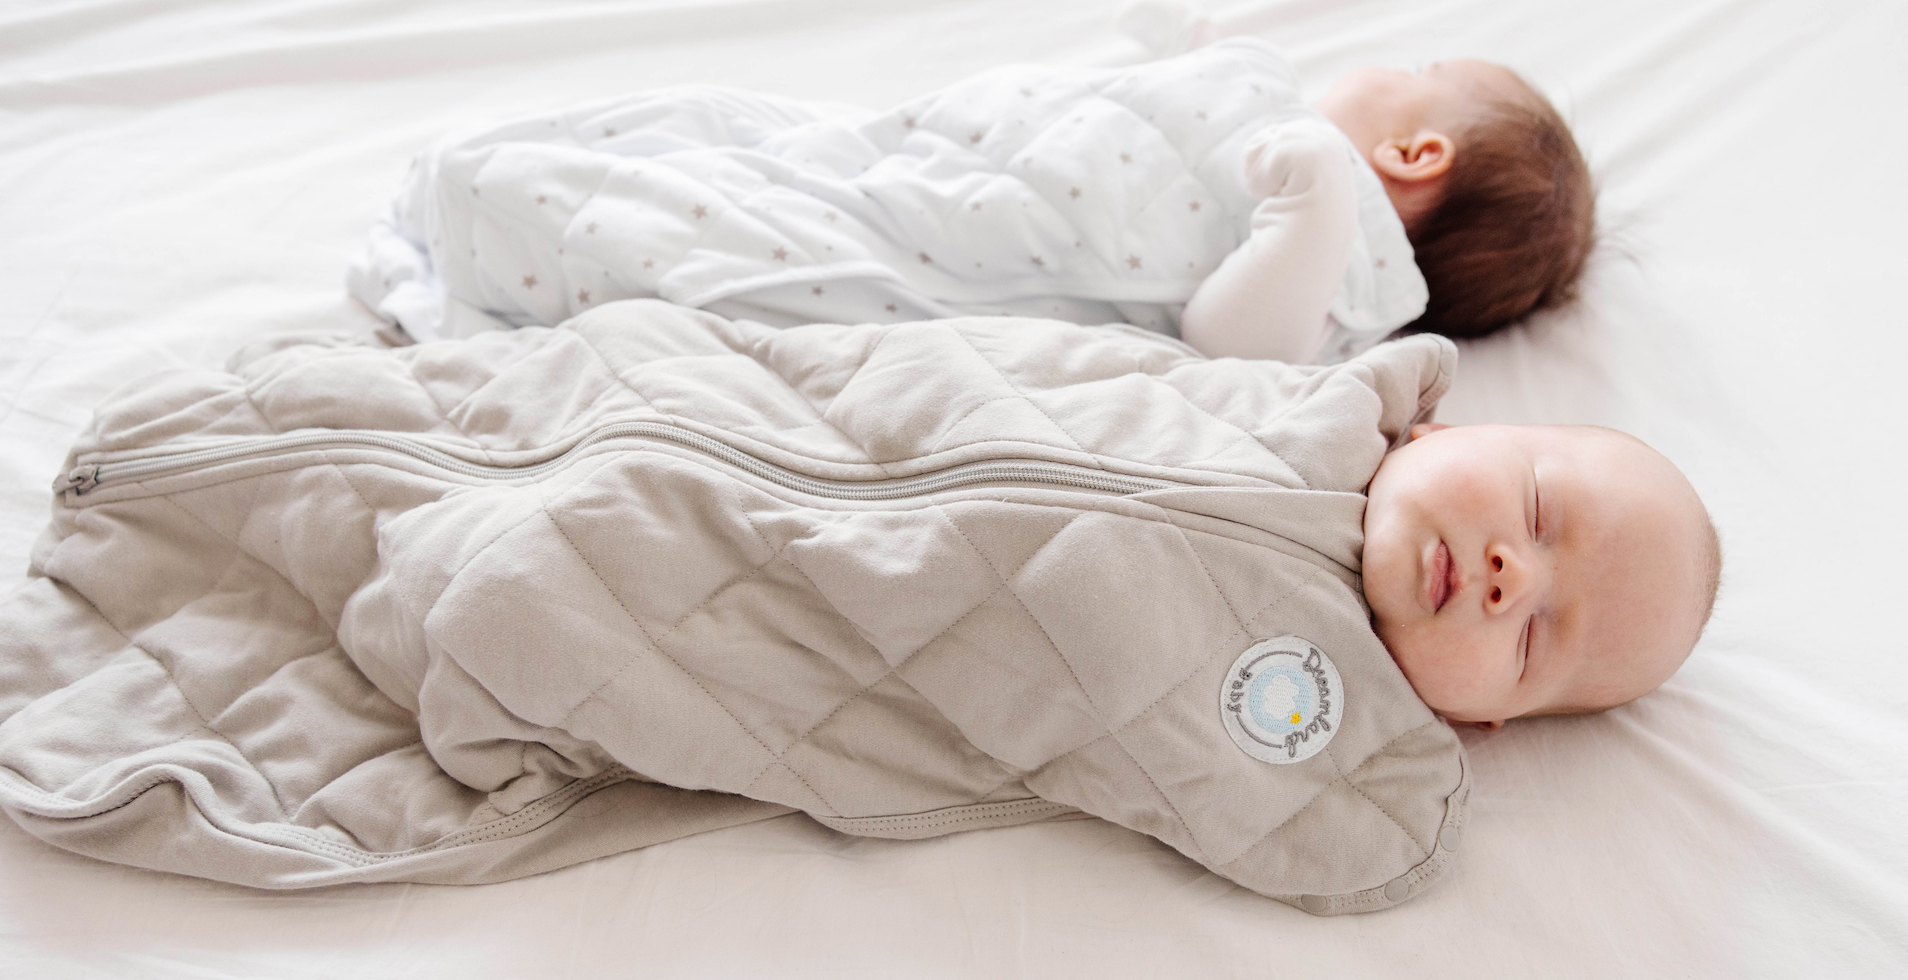 Baby Reflexology Points to Support Sleep - Baby and Me Wellbeing